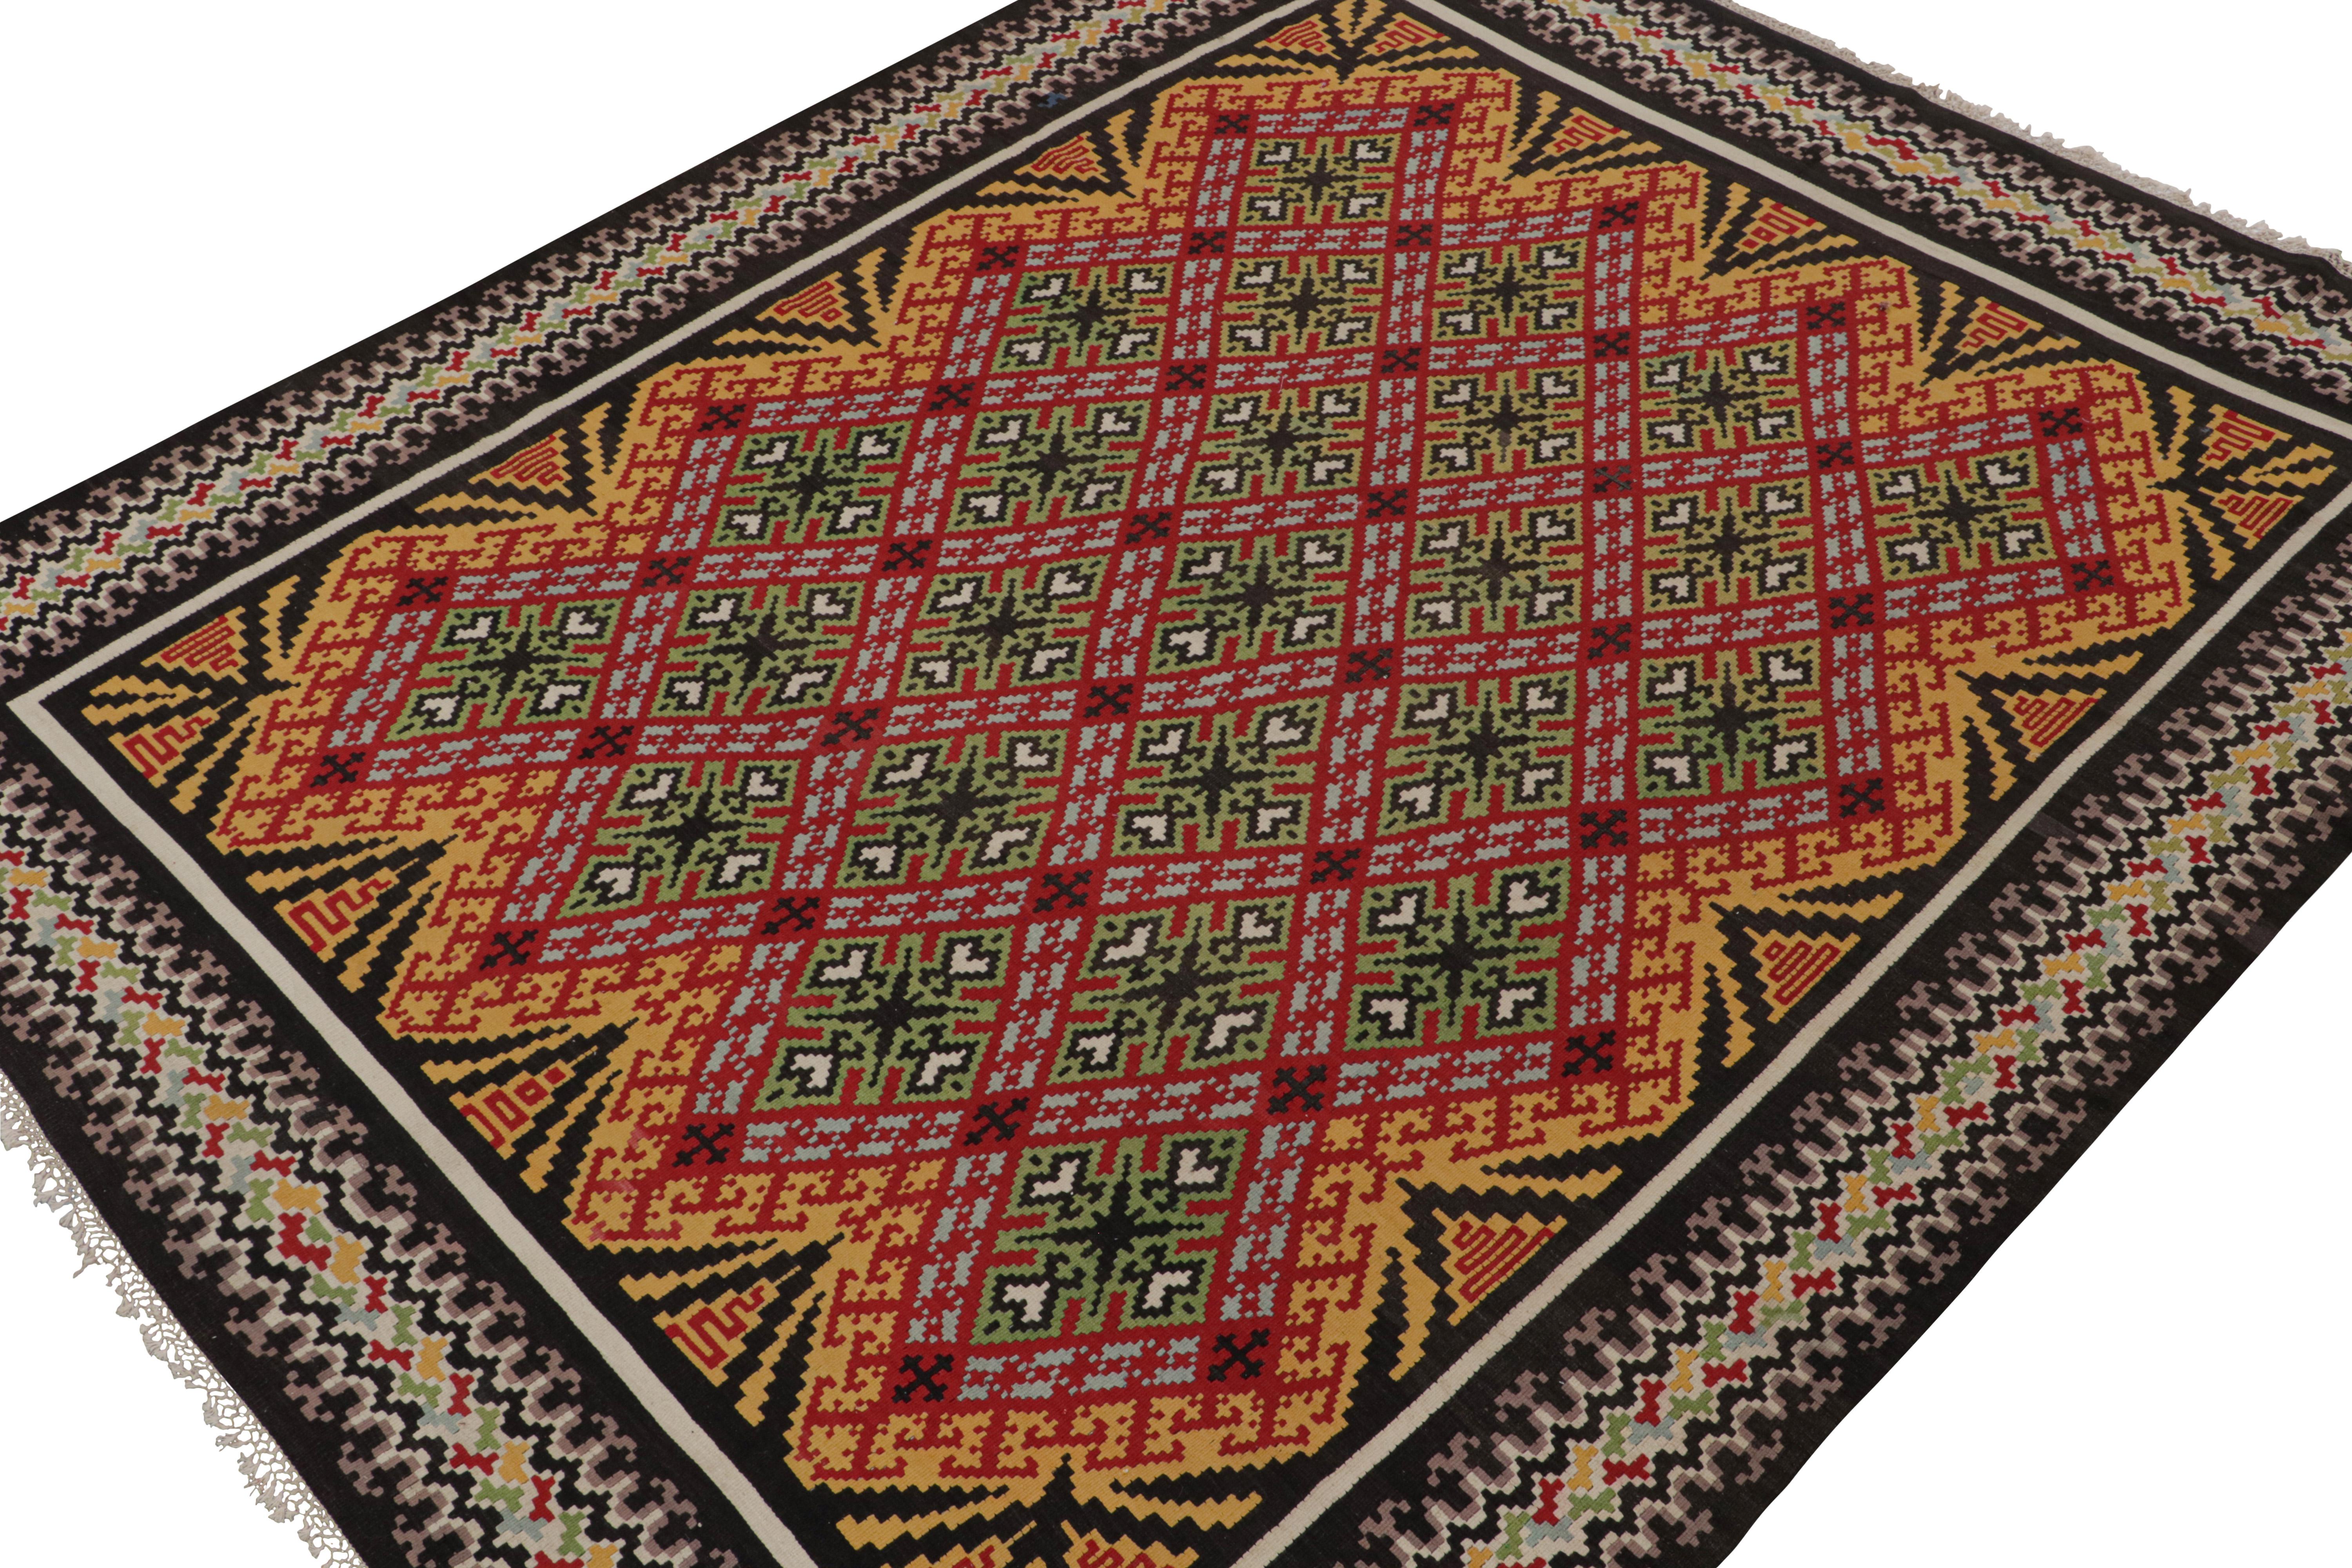 Handwoven in wool circa 1950-1960, this 10x12 vintage Kilim rug is believed to be a rare Balkan Kilim—an exciting new curation from Rug & Kilim. 

On the Design:

Connoisseurs will admire this as a collectible piece, both in its provenance and its